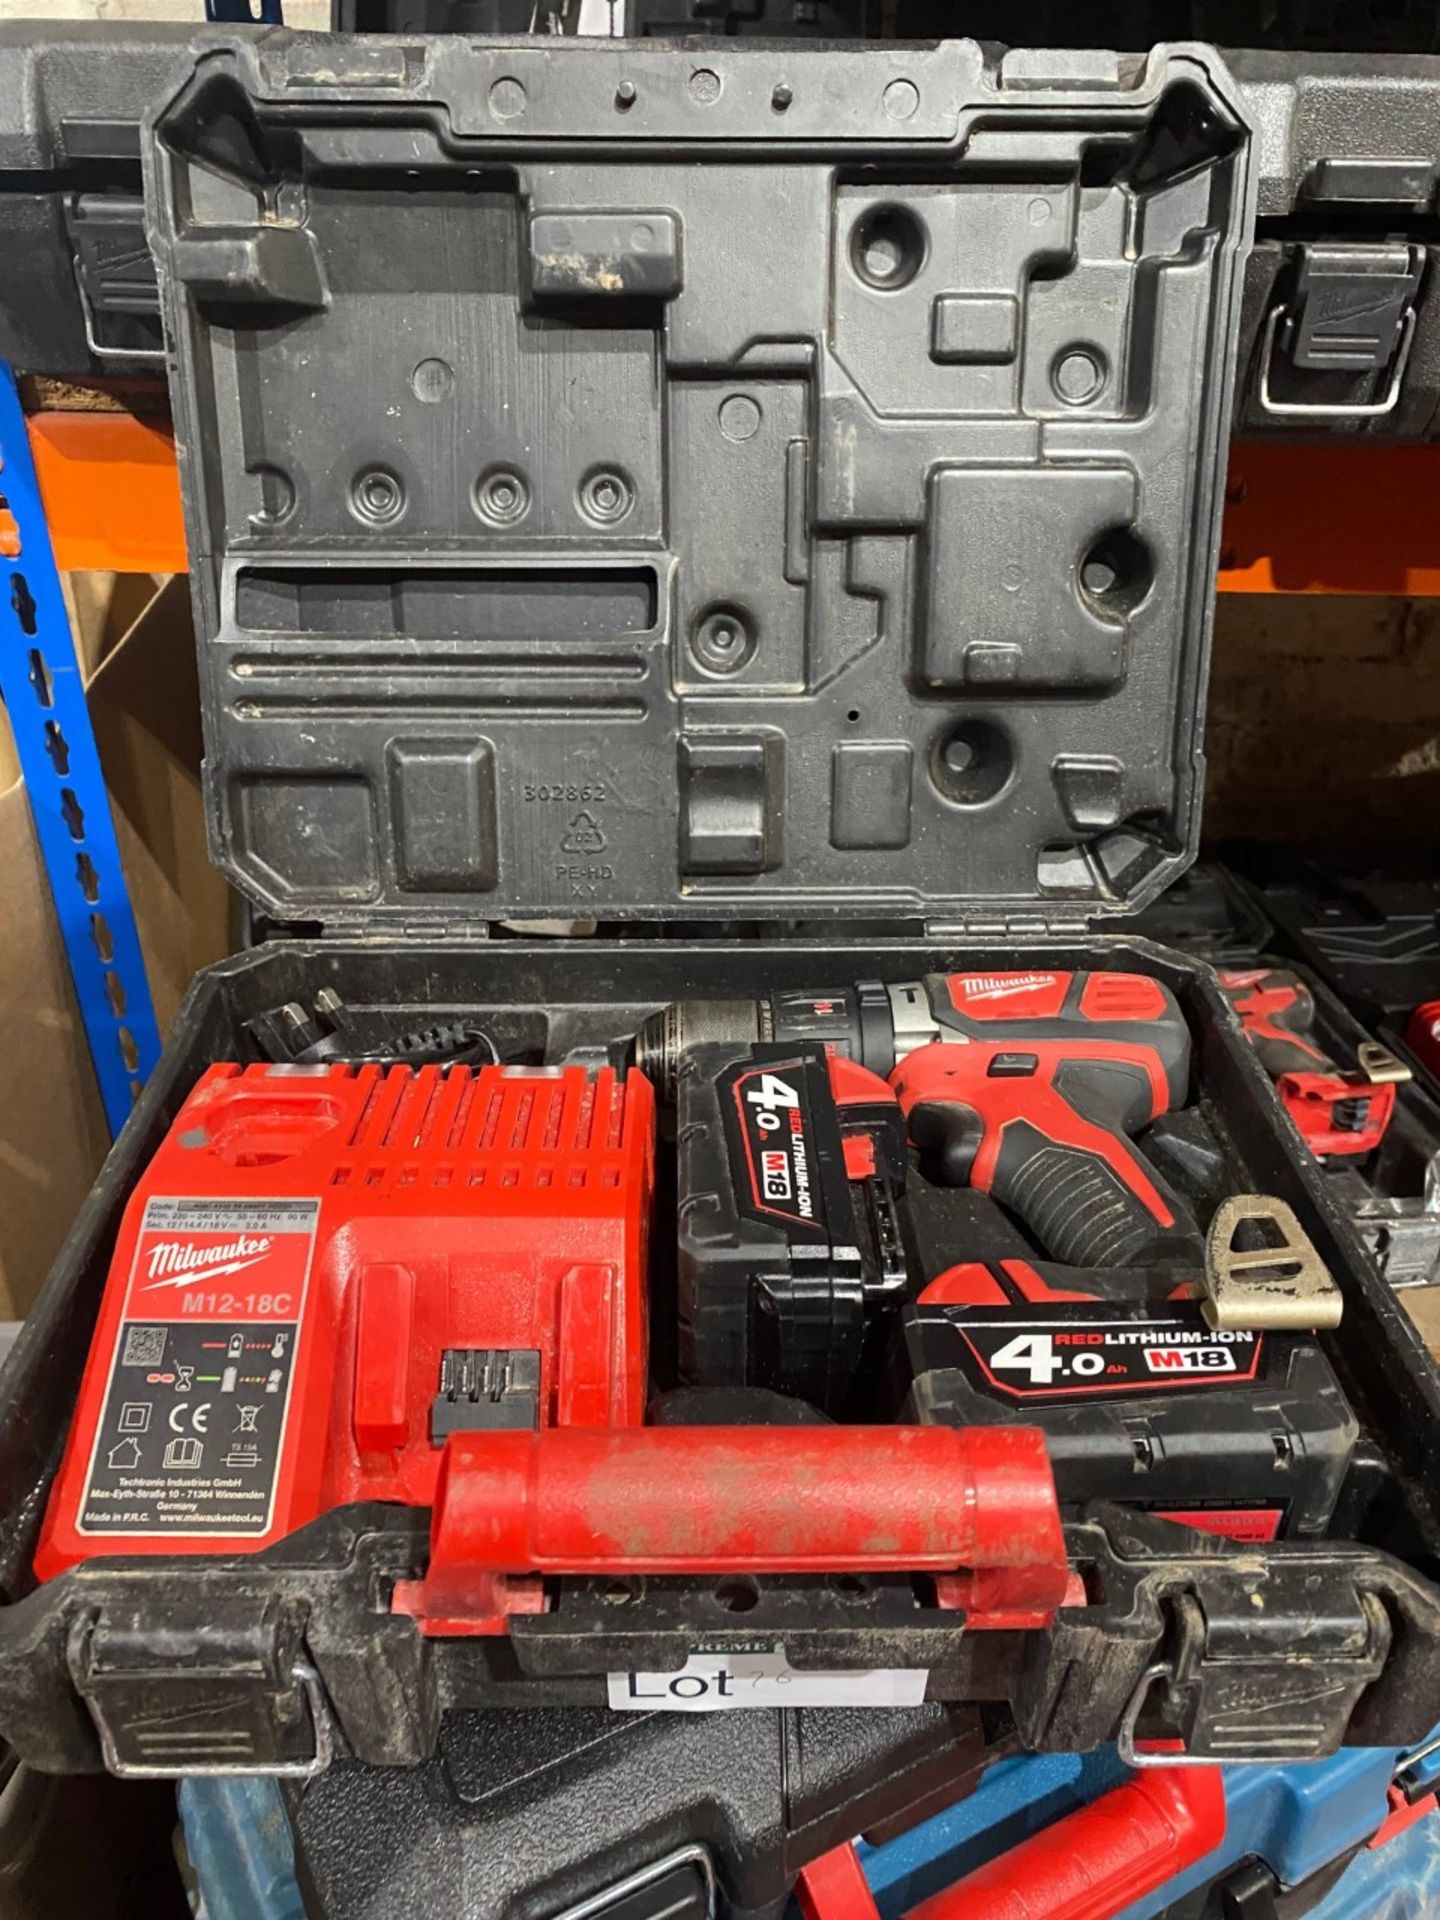 MILWAUKEE M18 BPDN-402C 18V 4.0AH LI-ION REDLITHIUM CORDLESS COMBI DRILL COMES WITH BATTERY, CHARGER